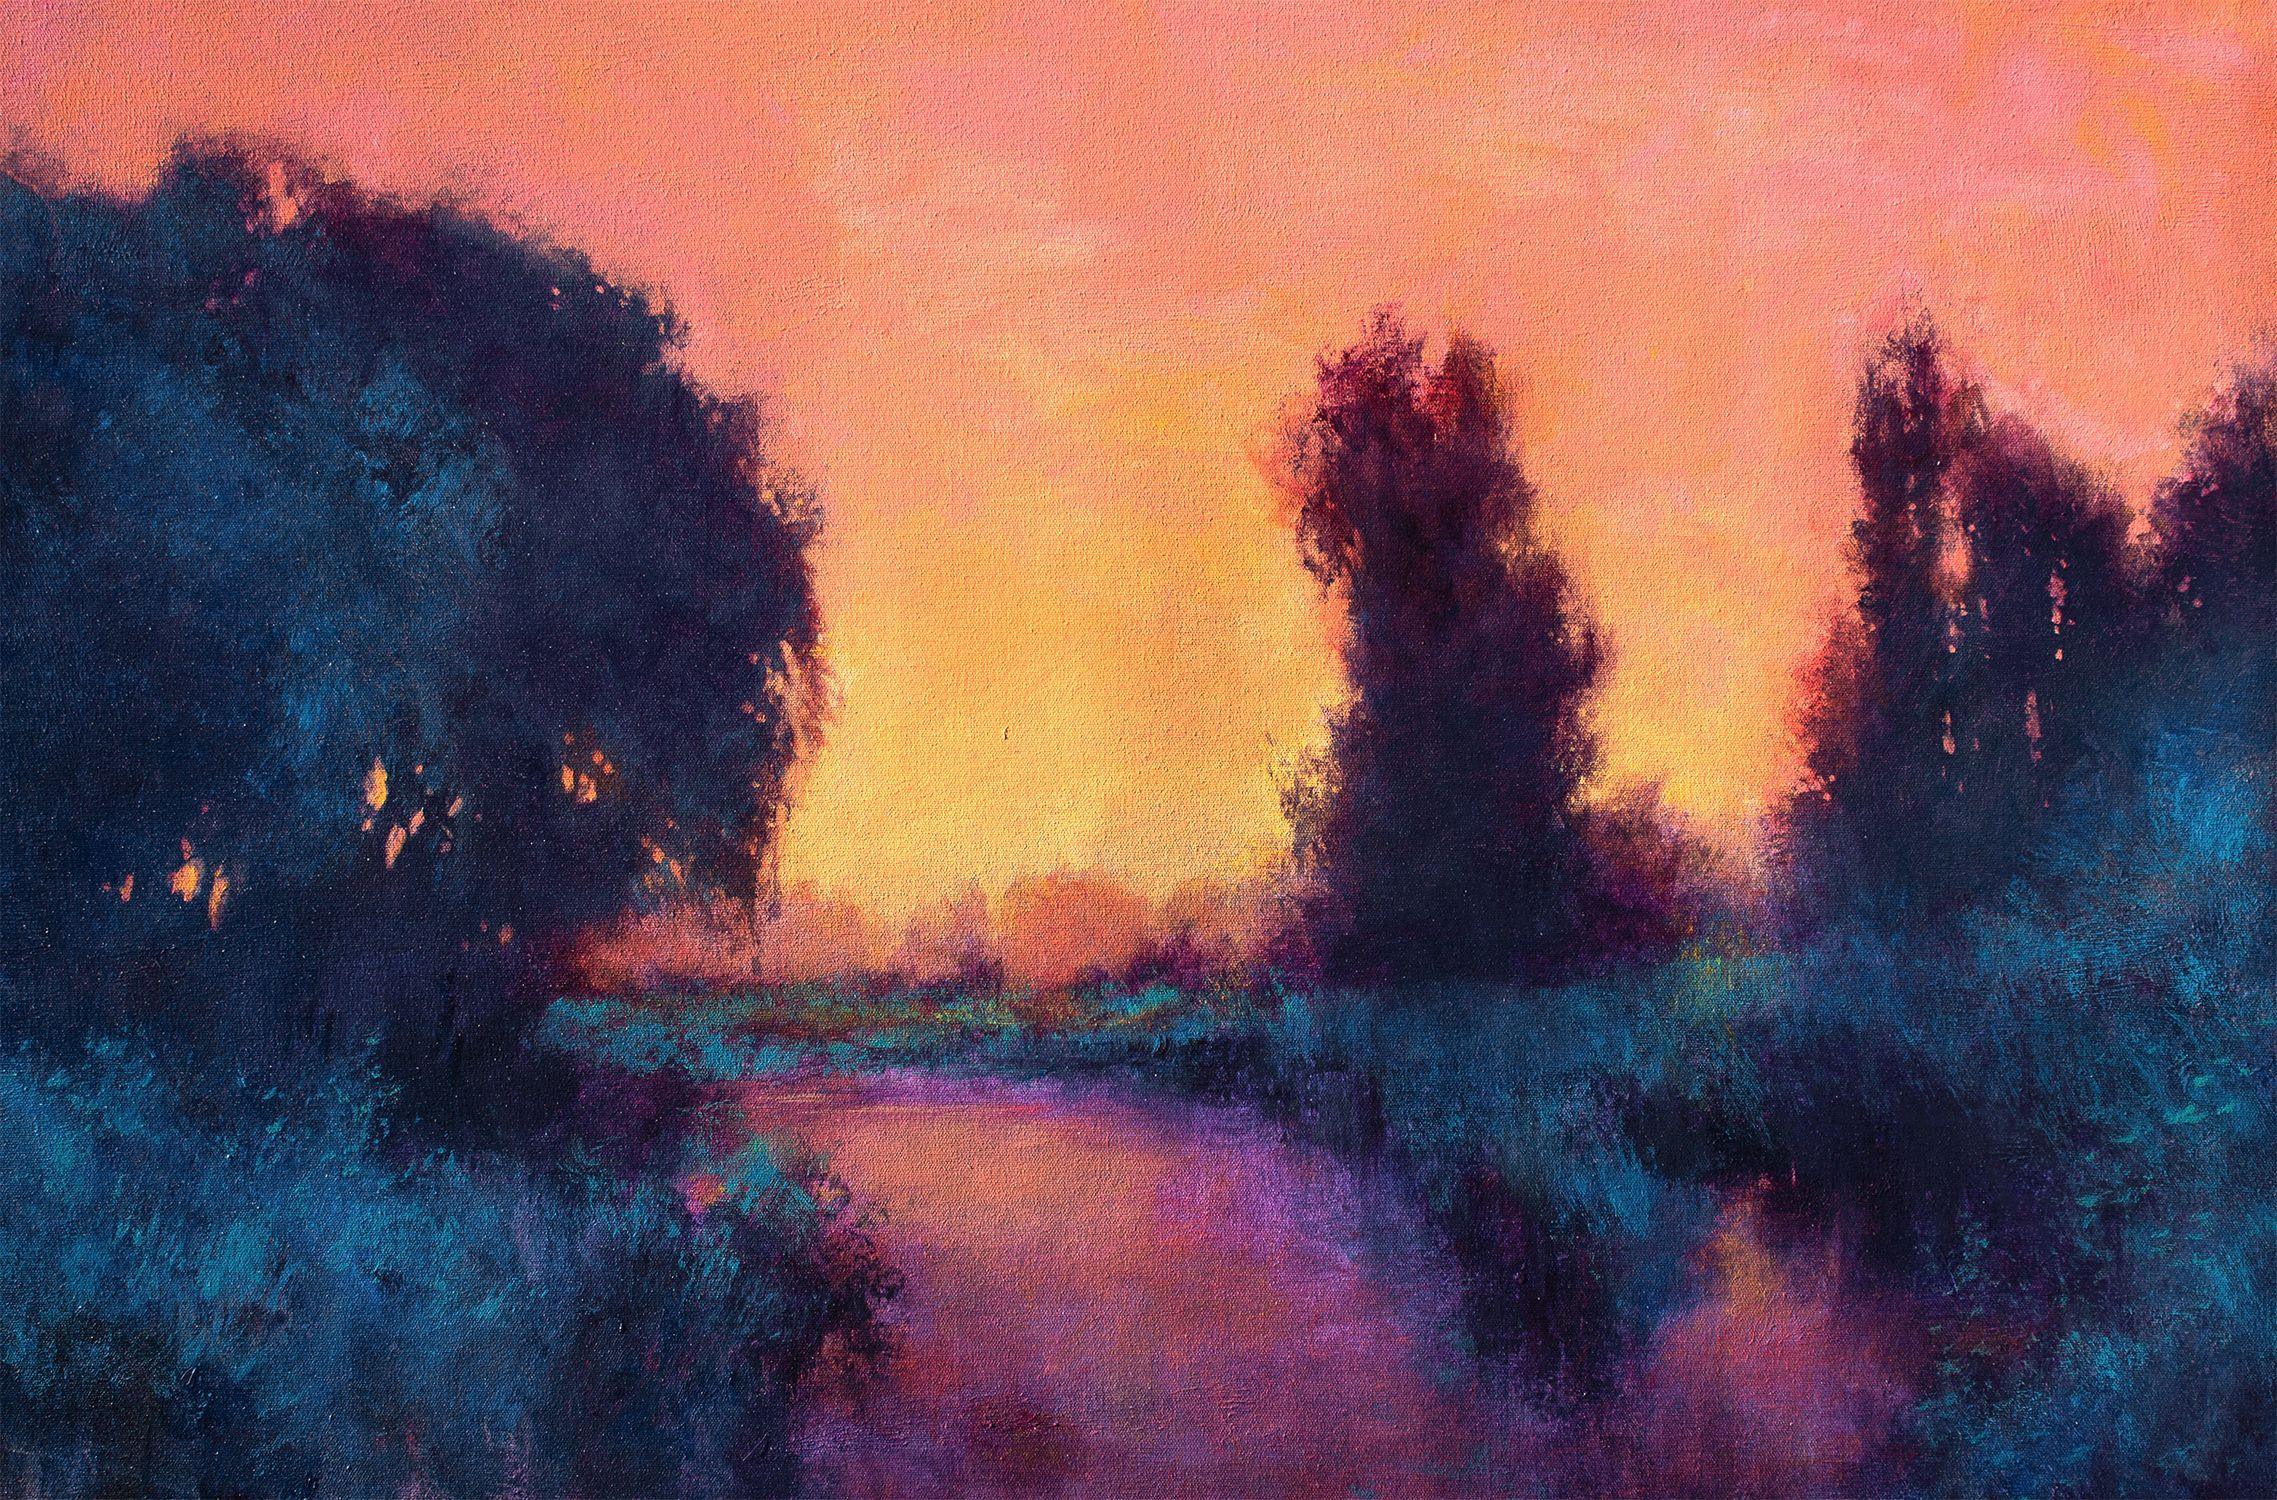 Evening Colors 220120 is a modern impressionist landscape painting created with palette knives and non traditional tools. This painting has nice rich jewel tones and glowing light.    This 24x36 inch painting is on gallery wrapped canvas.  Ships